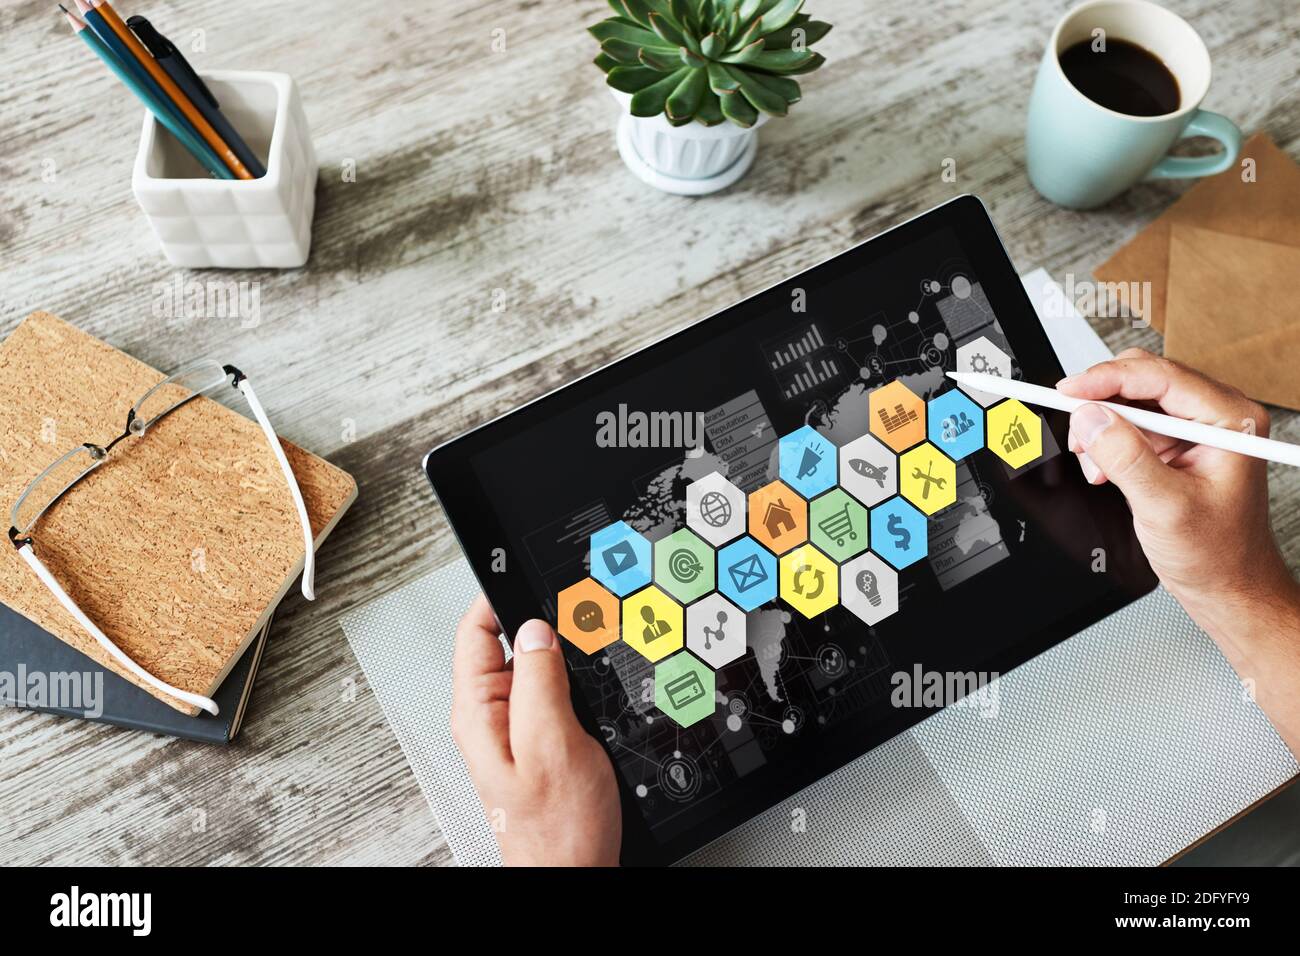 Application and diagrams on device screen. Business control panel and apps development concept Stock Photo